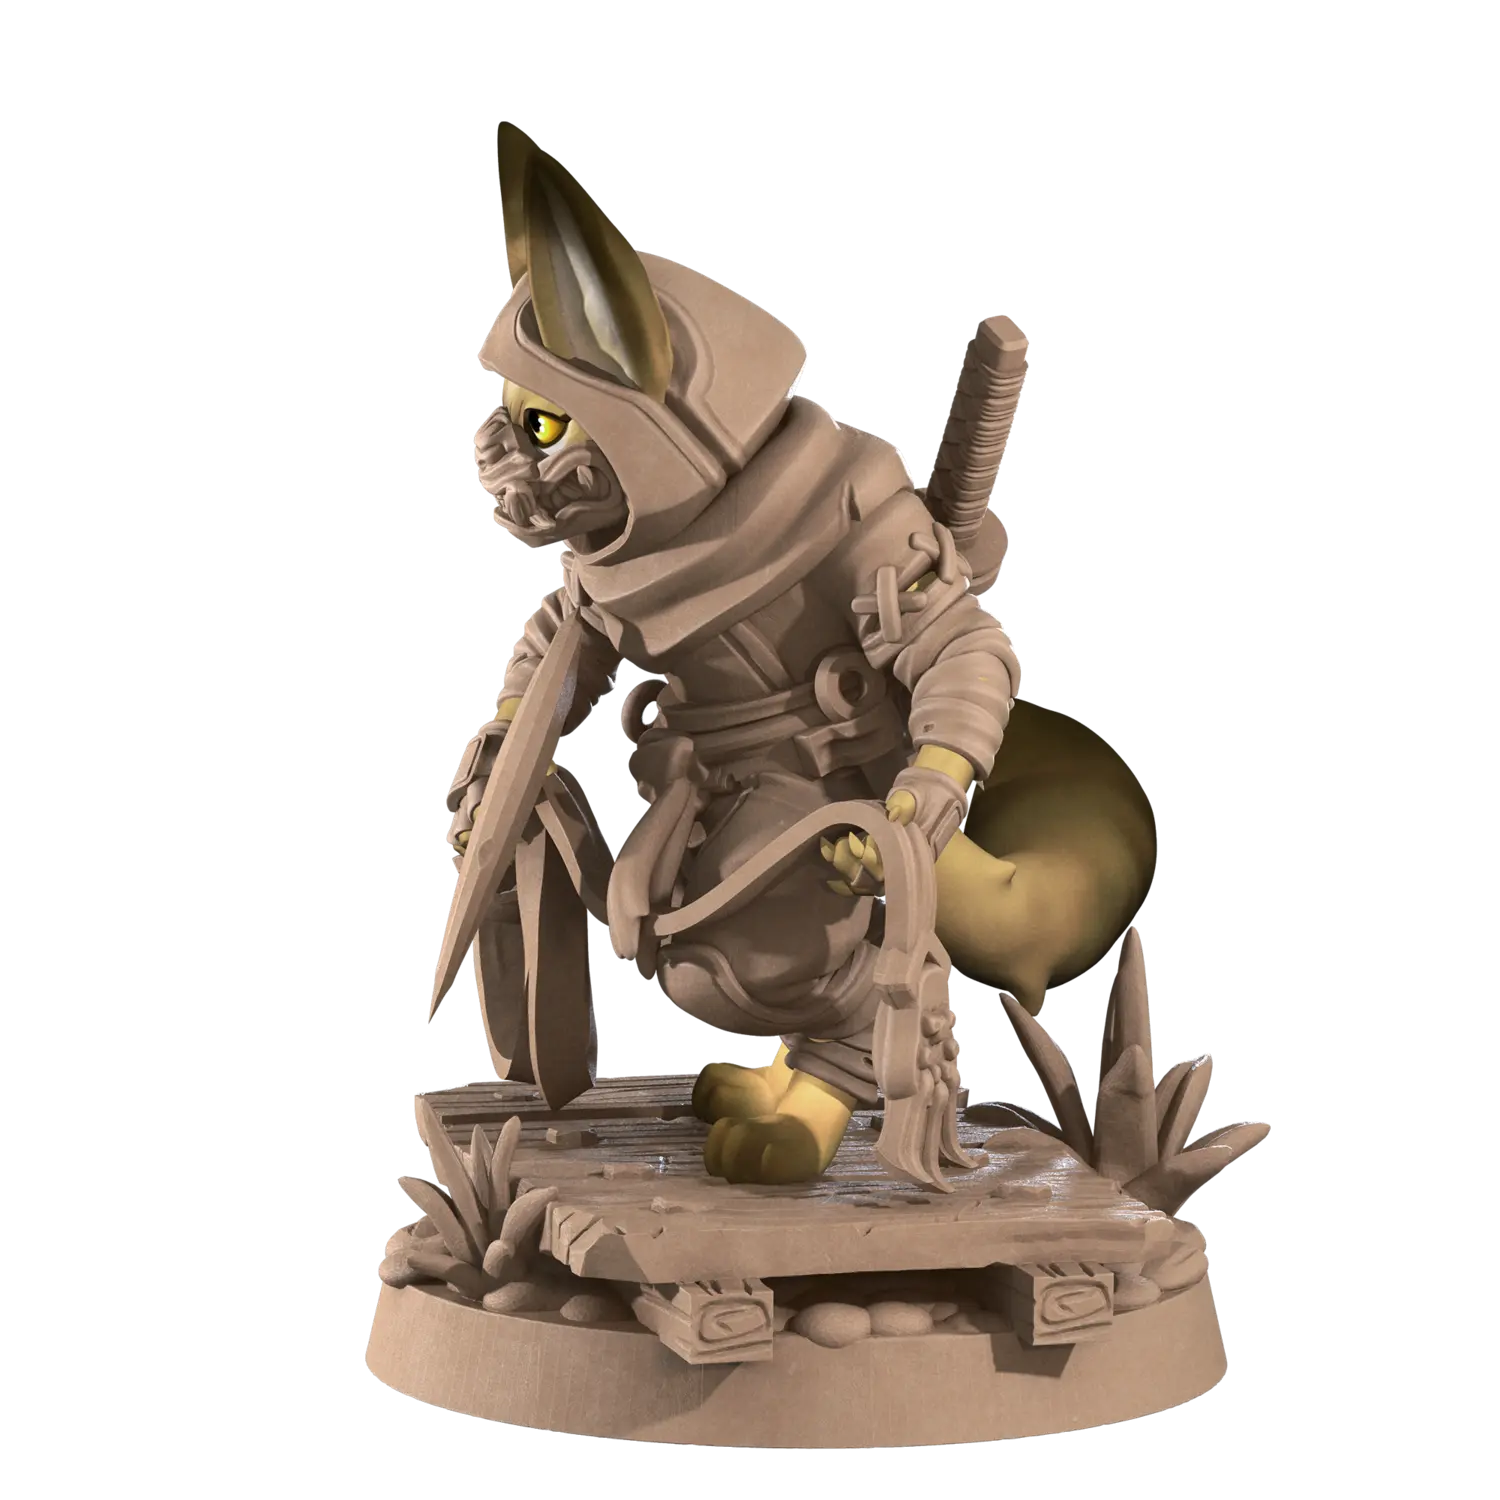 DnD Miniature - Rogue - Tabaxi Alisher 01 Miniature - Rogue - Tabaxi sold by DoubleHitShop